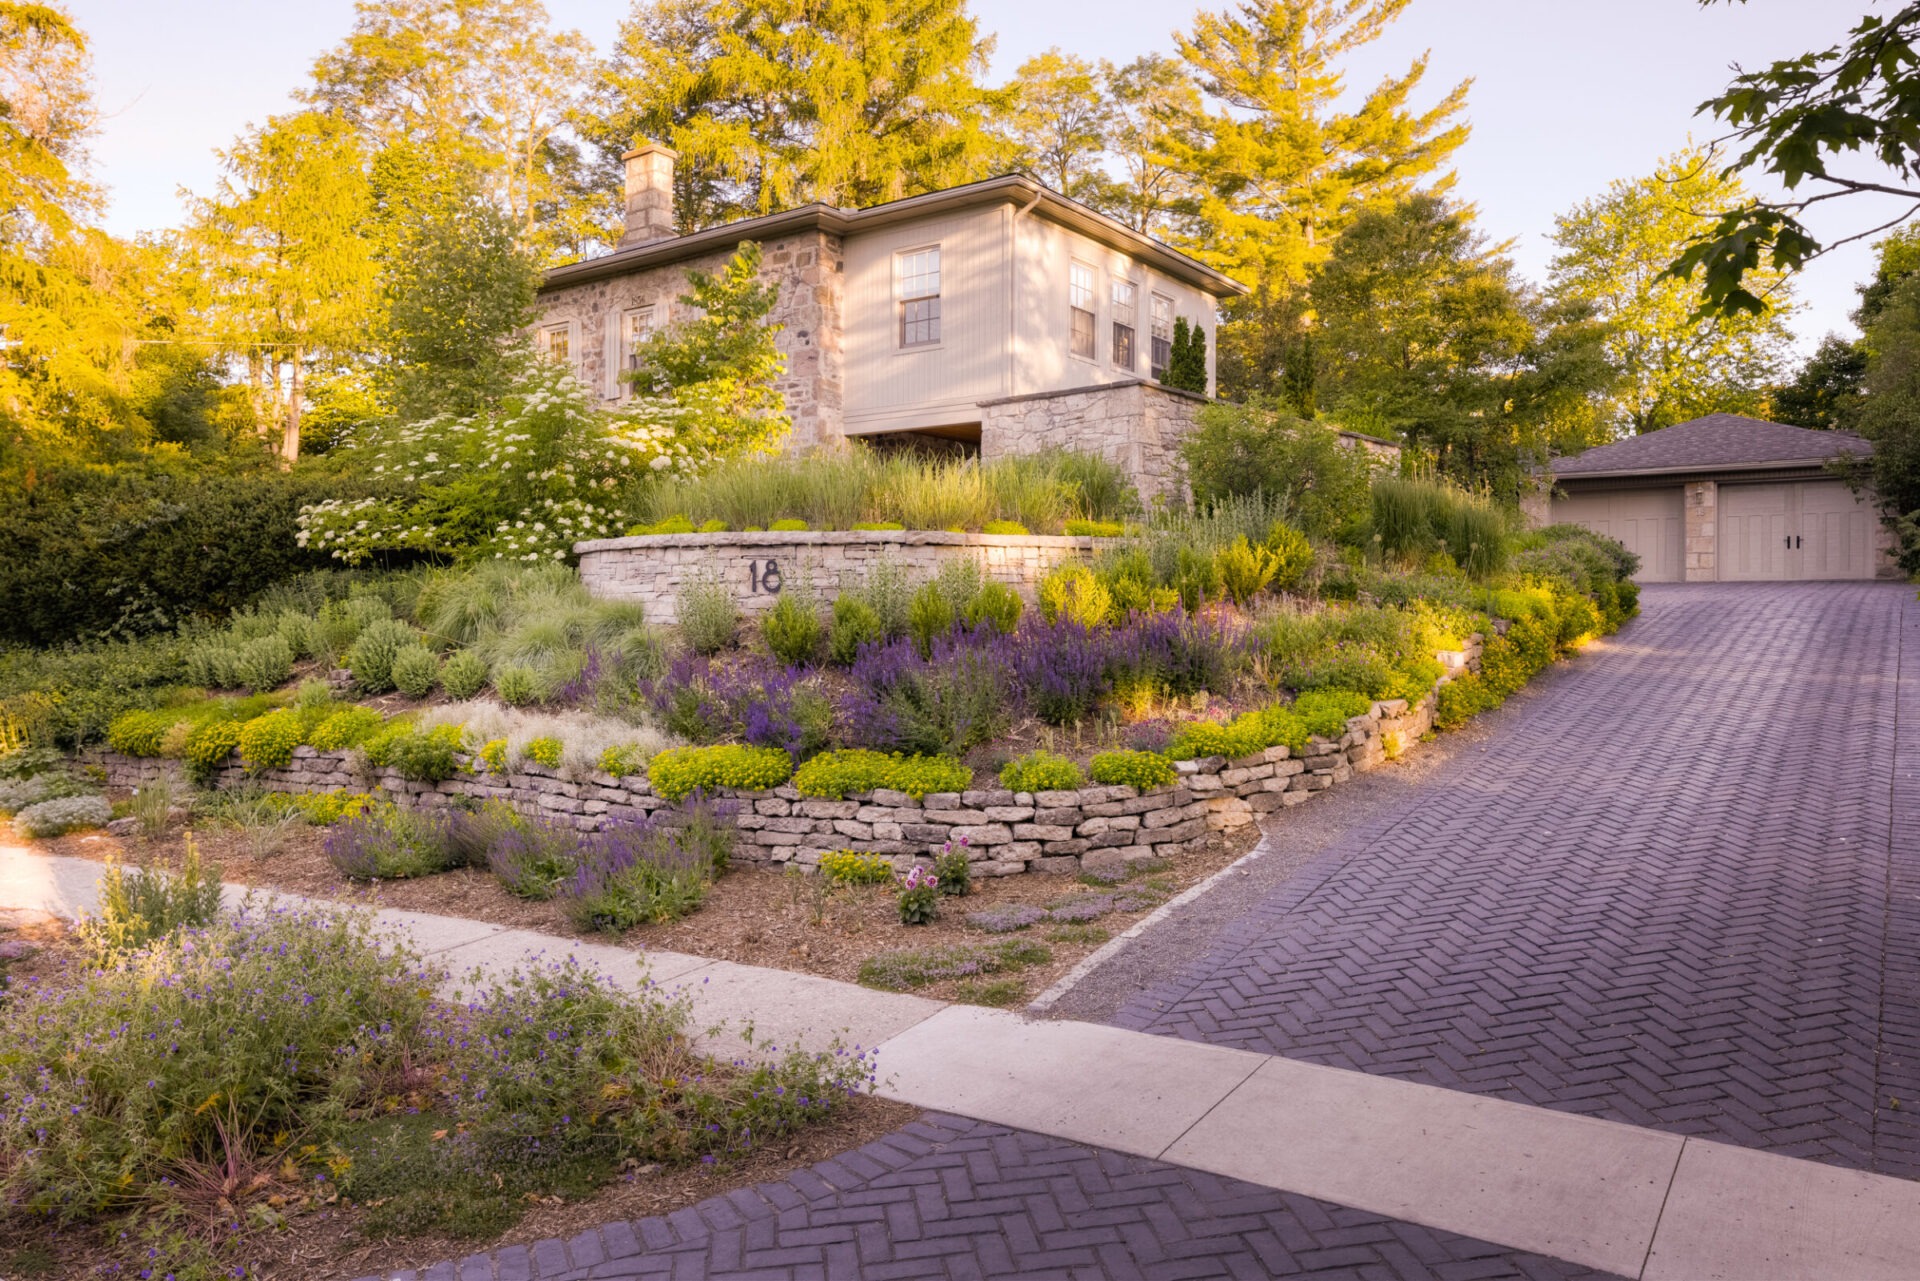 A serene residential setting featuring a stone house with siding, landscaped tiered garden beds, and a cobblestone driveway at golden hour.